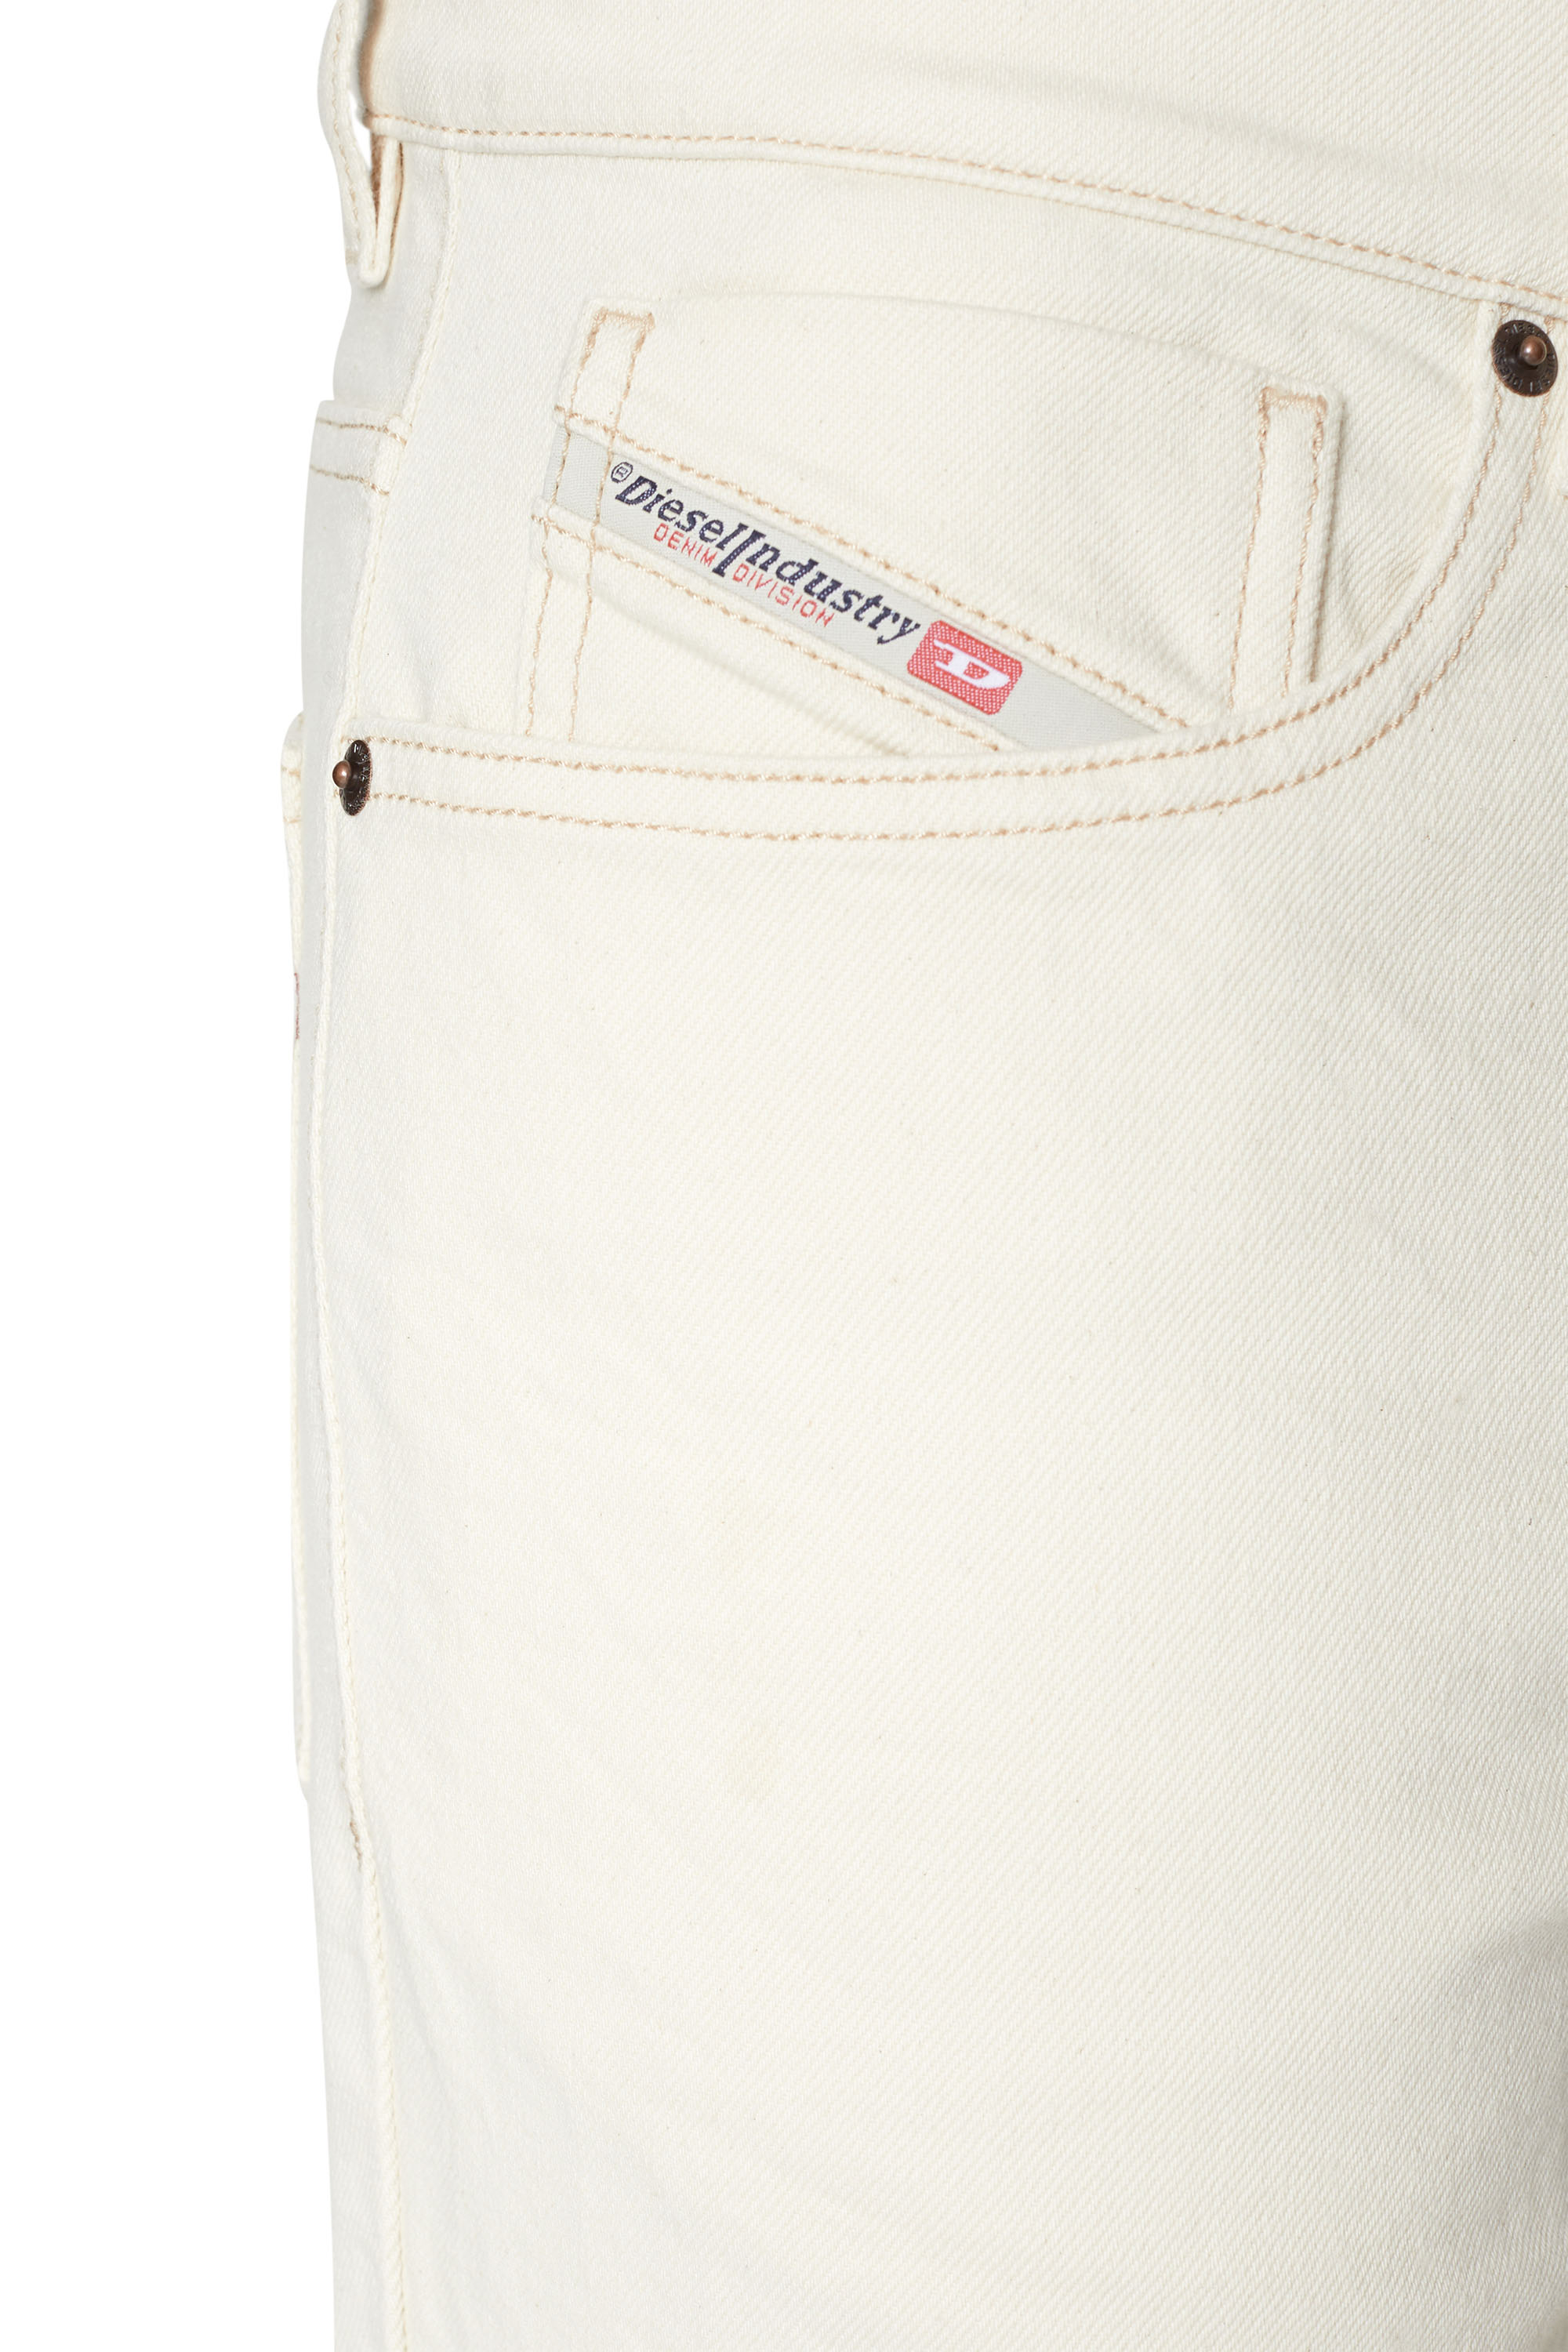 2005 D-FINING Man: Tapered white Jeans | Diesel